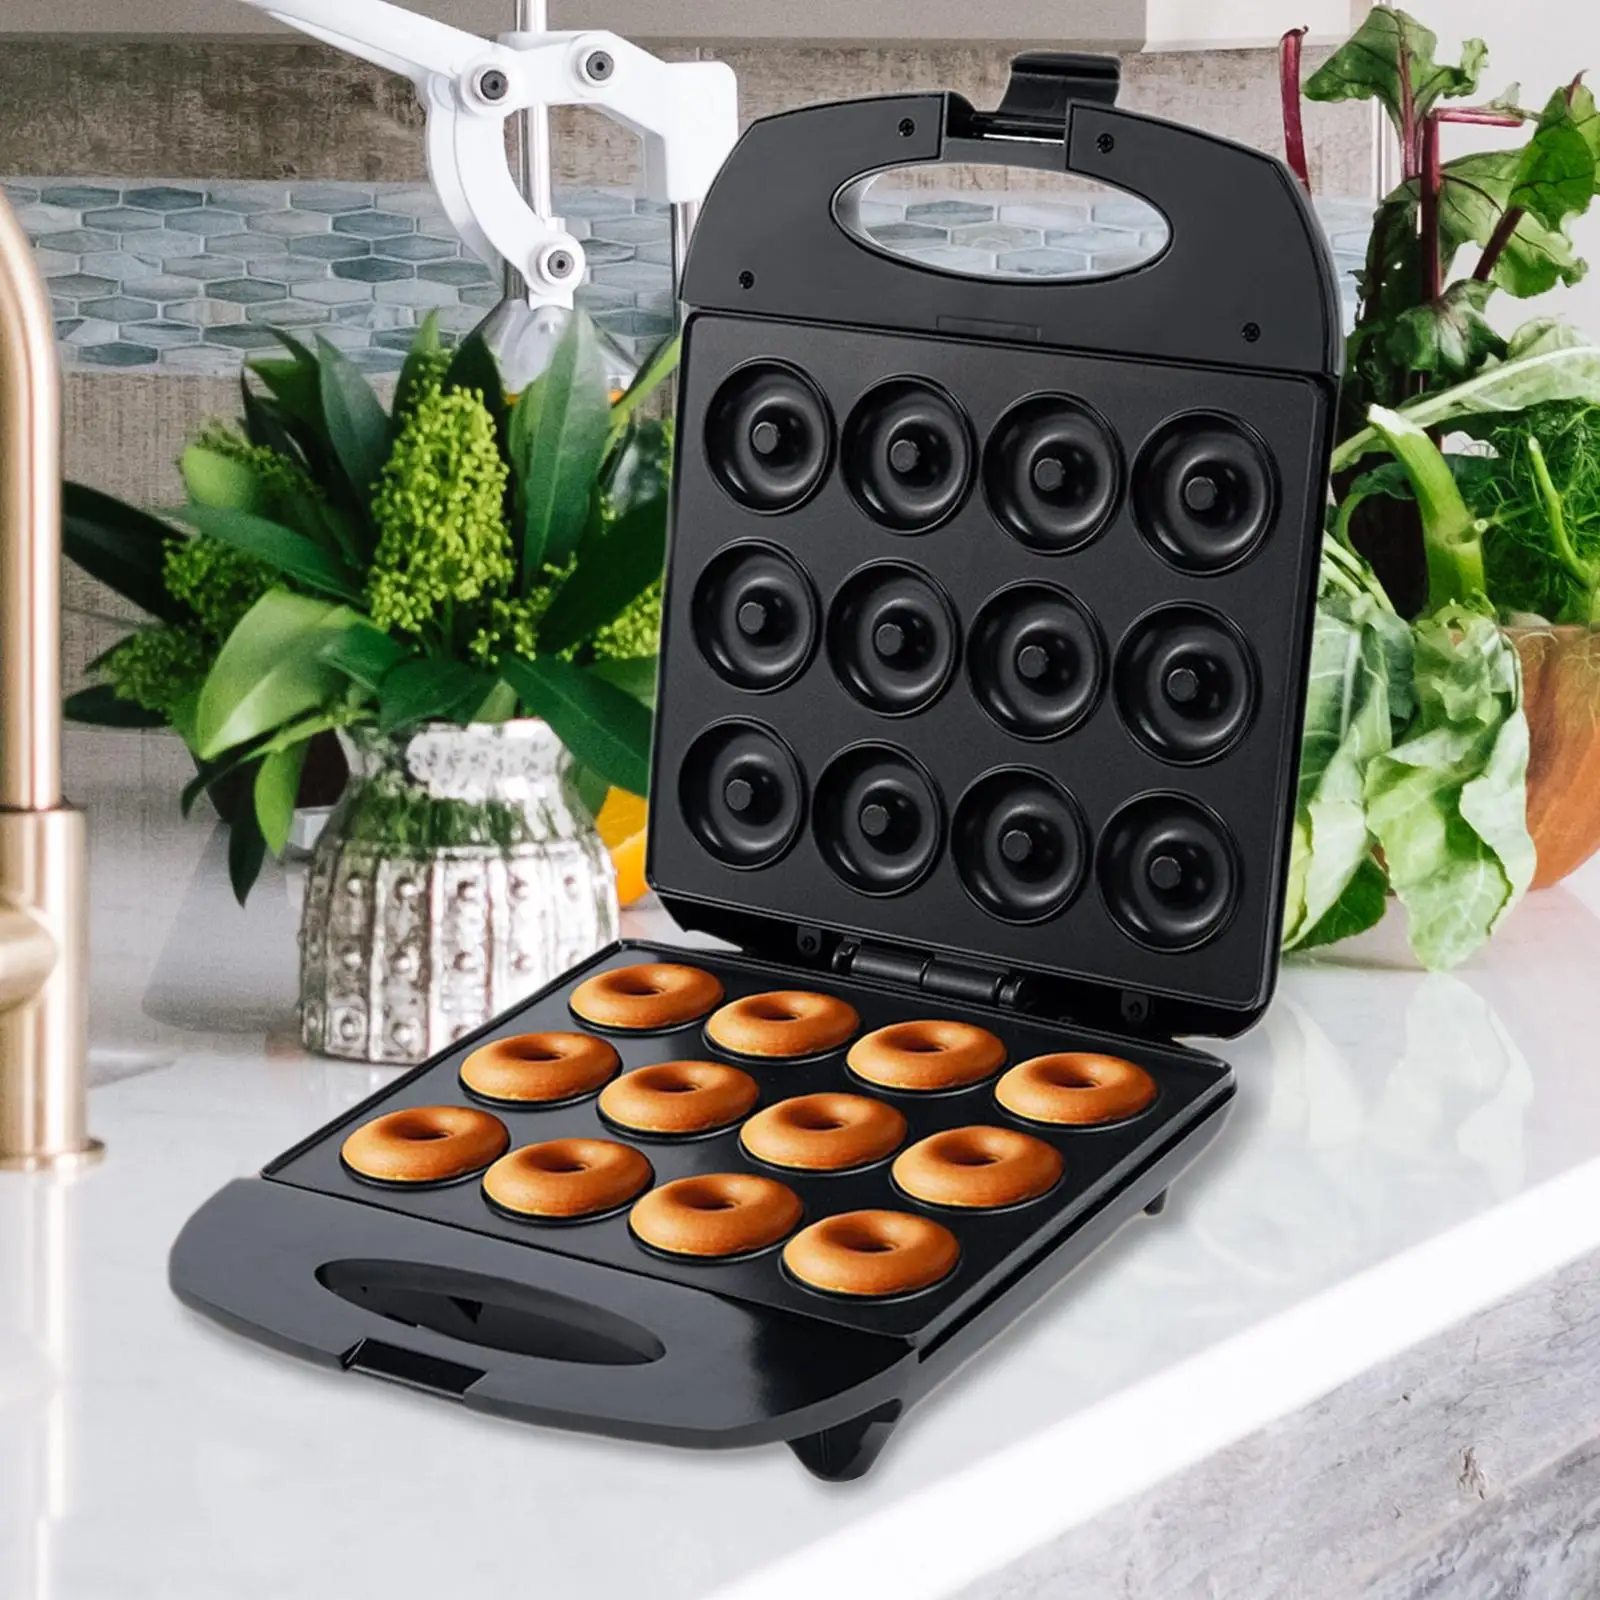 Donut Maker with Reminder Light Baking Tool Automatic Heating Egg Cake Bread Baking Machine for Coffee Shop Breakfast Snack